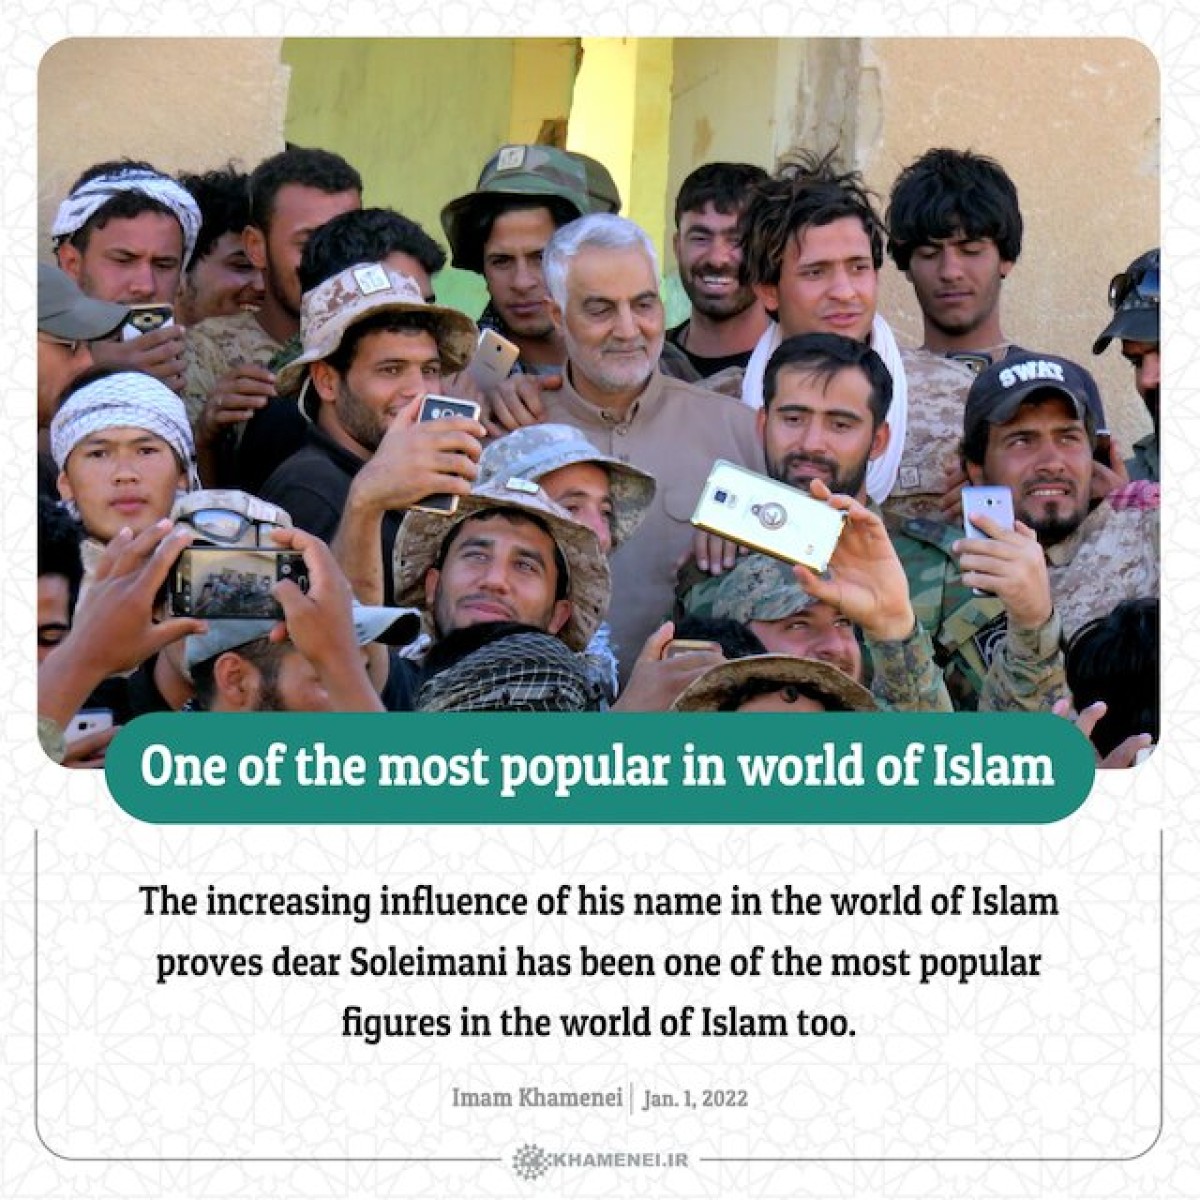 The increasing influence of his name in the world of Islam